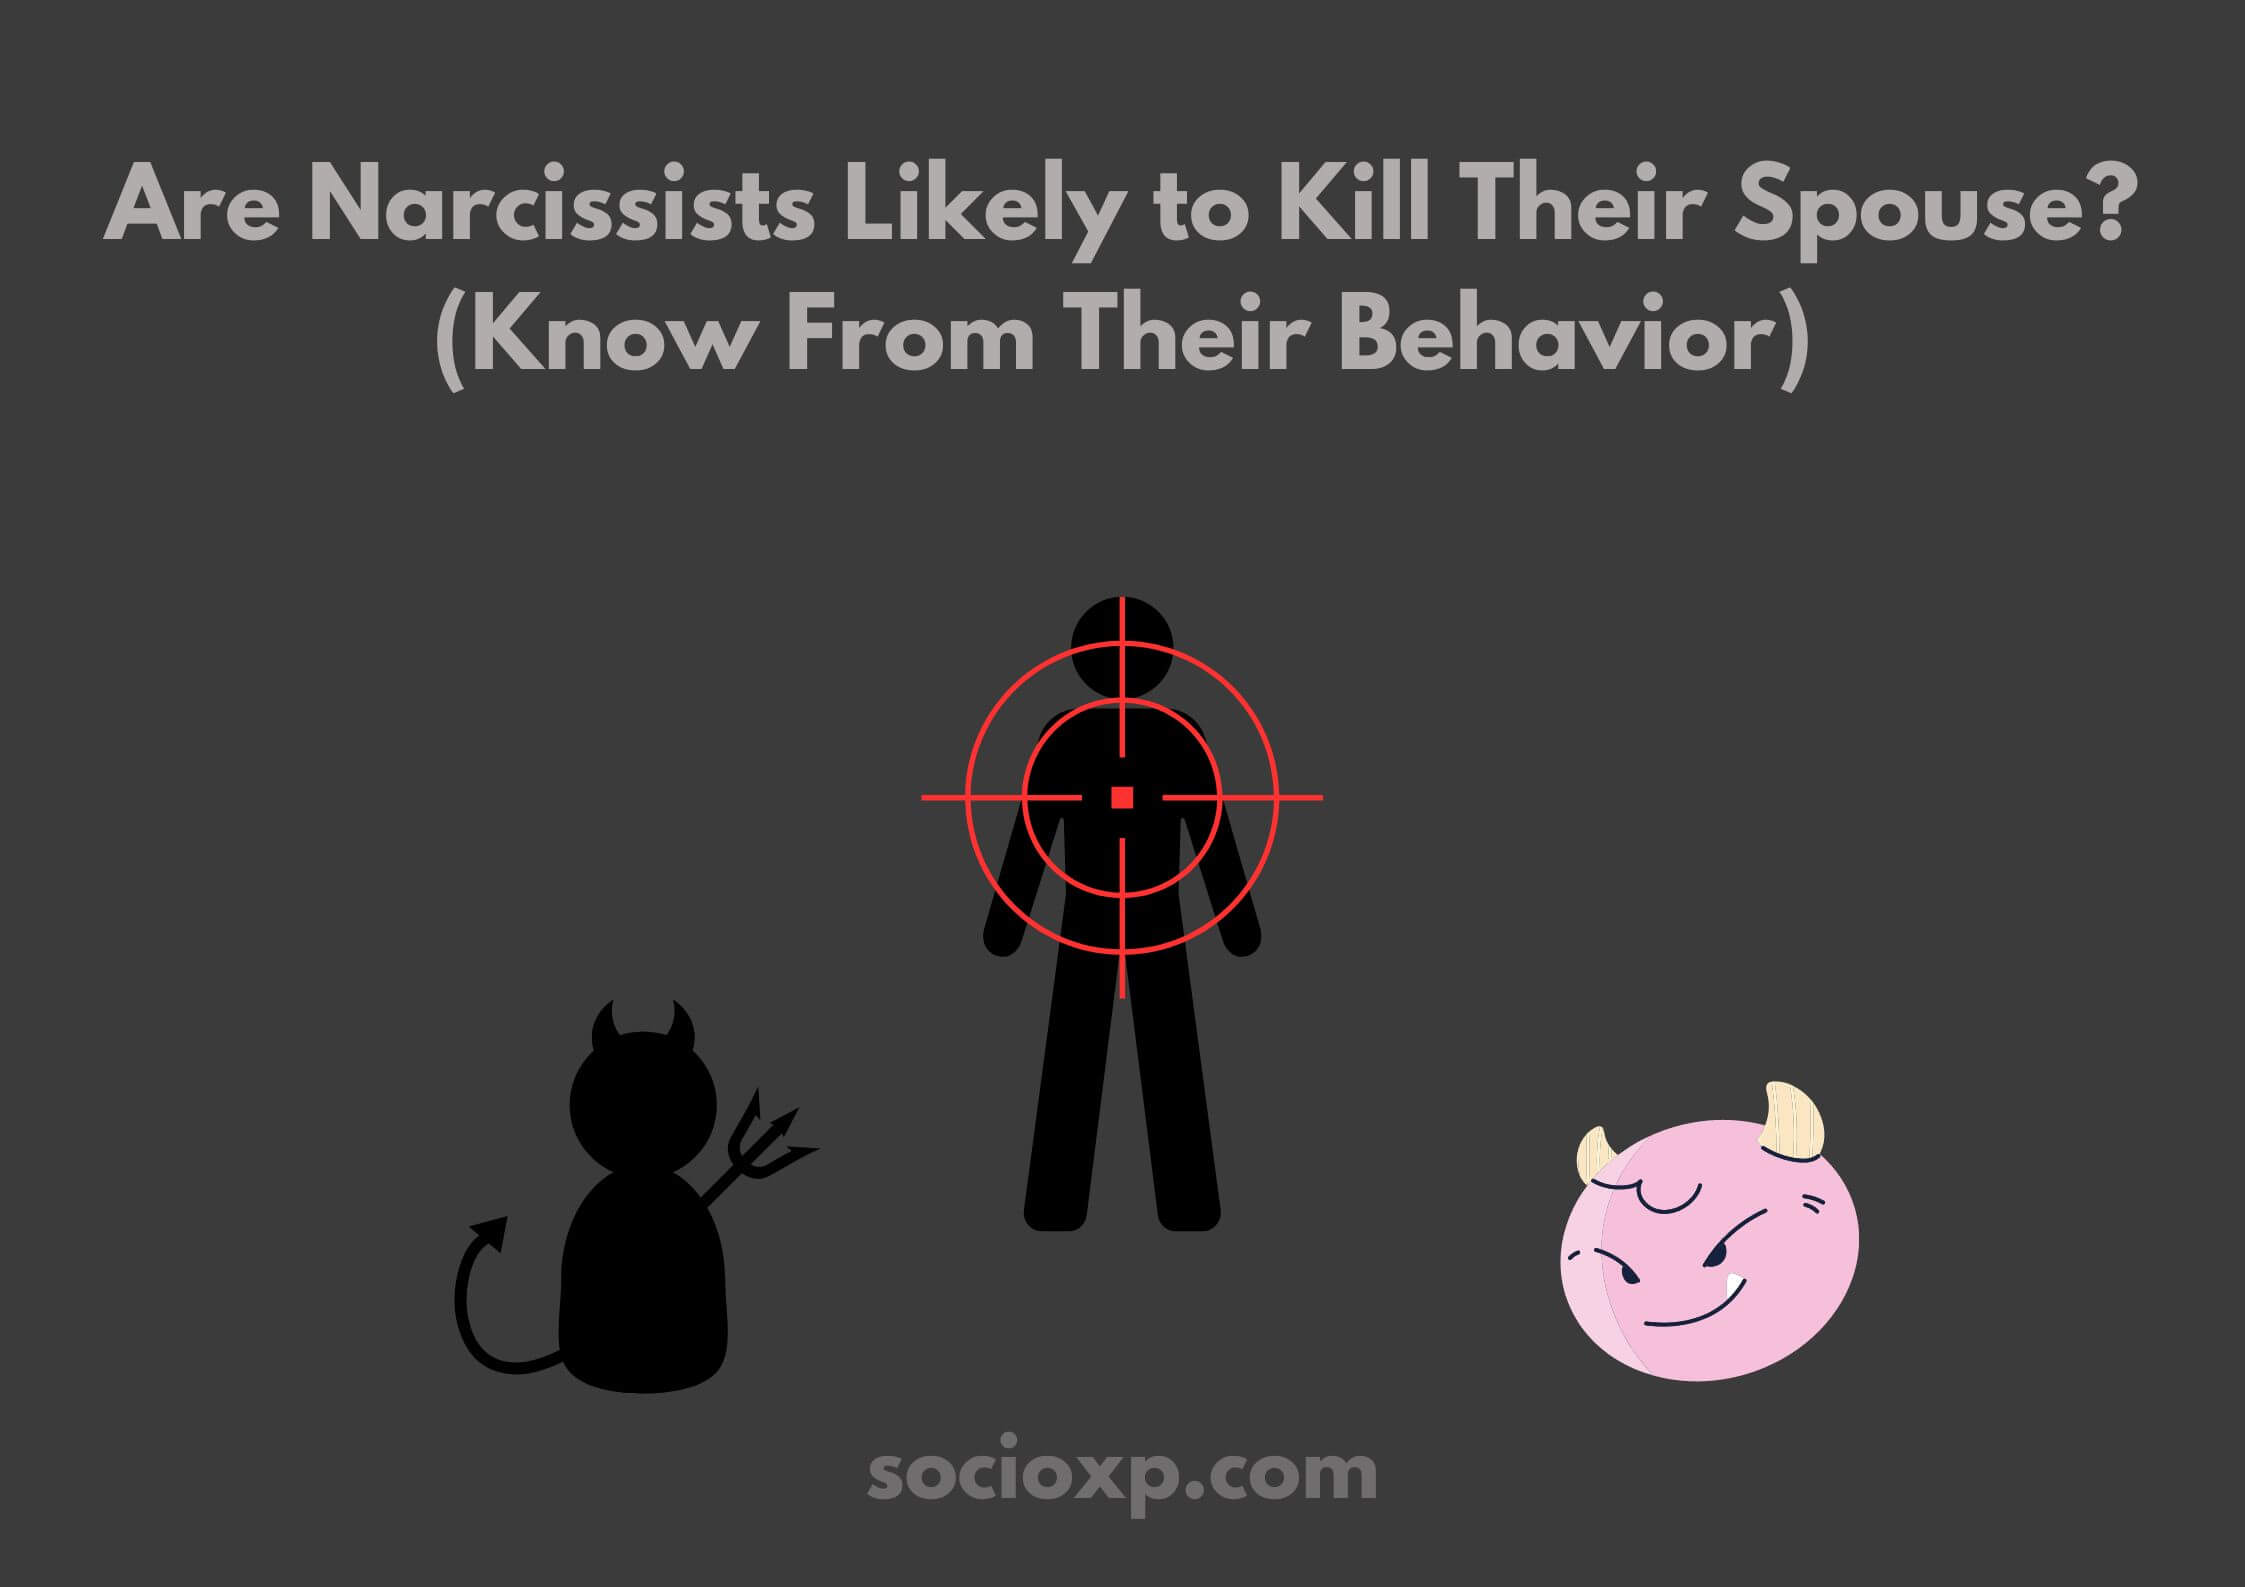 Are Narcissists Likely to Kill Their Spouse? (Know From Their Behavior)